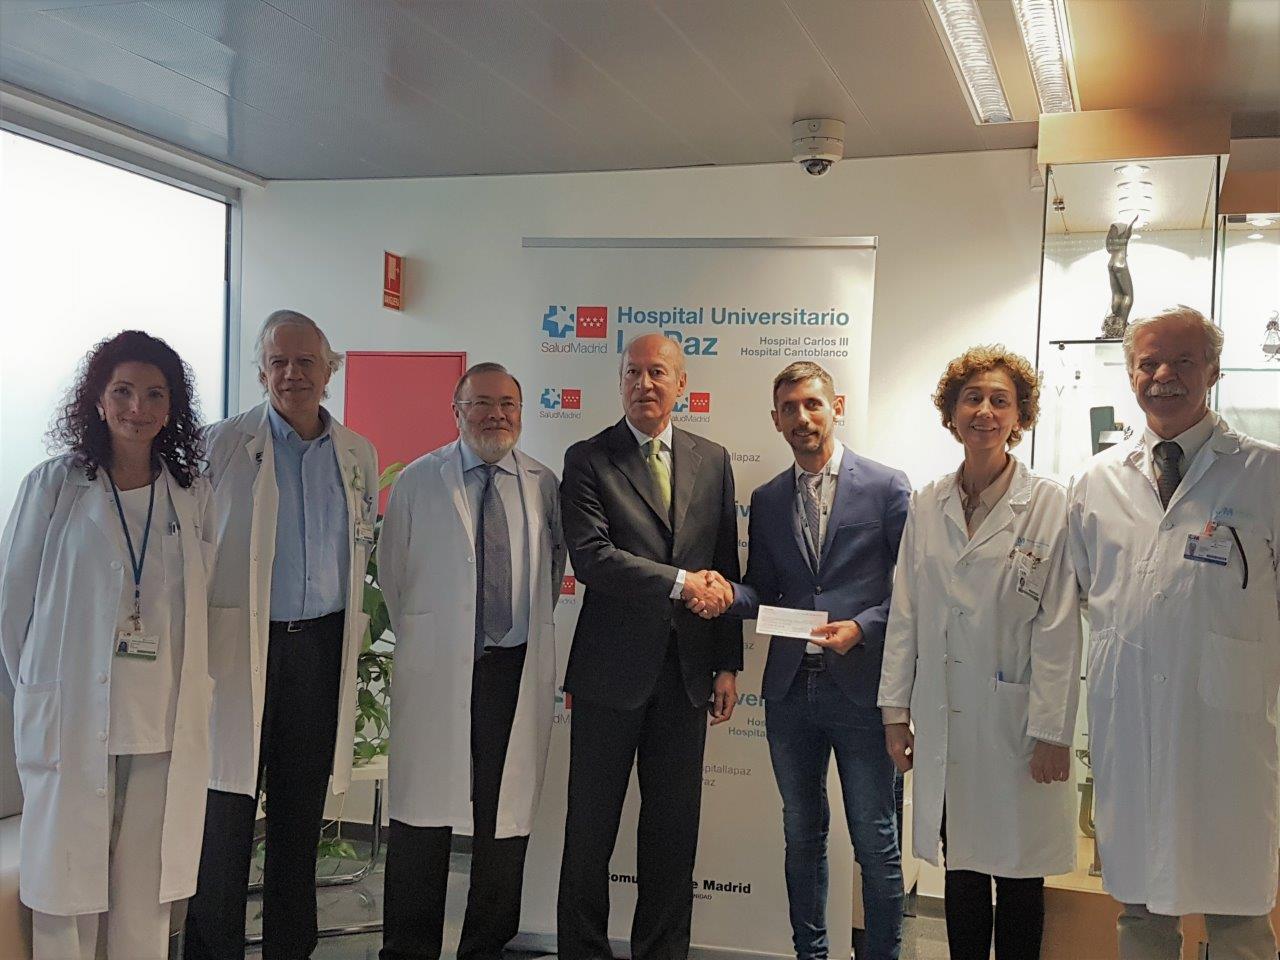 The Sergio García Foundation donates funds raised at the Andalucía Valderrama Masters to Hospital Universitario La Paz •The Madrid hospital will allocate the donation of 123,116.39 euros to a project to humanise the X-ray unit in the children's area. Video Sergio García Foundation Madrid, Monday November 27, 2017.- The Sergio García Foundation has donated all the funds raised at the Andalucía Valderrama Masters to Madrid’s Hospital Universitario La Paz to support an interior design project aiming to humanise the X-ray unit in the children's area. Antonio García, Sergio’s uncle and responsible for the Foundation, presented the cheque to doctors Javier Cobas, Children and Maternal Hospital Deputy Manager; Rafael Pérez-Santamarina, Hospital Manager; María Pilar Moreno Anaya, Central Services Deputy Director; Gonzalo Garzón, Head of Radiology; Esther Rey, Nursing Director; and Eduardo López Collazo, Director of the Research Institute. The unit will be redesigned into a welcoming, bright and relaxing environment through the choice of appropriate materials, colours and images. In addition to caring for individuals, the project is environmentally friendly, as the improved lighting system will result in a 60 percent saving in power consumption. “We are all very excited with this project, which is an area of real need. We have invested in equipment recently, but we lack infrastructure, and children must also be separated from adults,” explained Dr. Cobas. “The renovation will take about three months since we cannot stop our activity. Our children’s hospital, considered as number one in Europe, is well equipped with 240 beds and receives 9,000 patients per year, as the only hospital that can provide all medical and surgical specialties, allowing all types of pediatric transplants to be performed.” For Sergio García, “Winning the Andalucía Valderrama Masters was an incredible feeling, I’m still over the moon. It was a great event for many reasons: Valderrama is one of my favourite courses, I played really well and felt confident, kept patient and waited for my chances; Joost (Luiten) played unbelievable and did not make it easy for me, and the support from the spectators was awesome. “When I was presented with the project of humanising the X-ray unit, I really liked the idea. I am very happy because we have contributed to make a dream come true for the patients and their families, through the event and my Foundation”. The third edition of the Andalucía Valderrama Masters took place from October 19-22 as Garcia secured his third win in a season where he achieved a career ambition by sealing his maiden Major title at the Masters Tournament. García set up his charitable foundation in 2002 for the purpose of contributing to the social inclusion of economically-deprived children through social assistance benefits and the practice of sport as free-time activity. The Foundation supports, on a regular or an occasional basis, a large variety of NGOs and humanitarian associations. Through his foundation, Sergio has been one of the key drivers of Spanish adaptive golf. Together with the Deporte y Desafío Foundation, they conducted 23 adaptive golf clinics throughout Spain attended by more than 700 disabled persons. The Andalucía Valderrama Masters was sponsored by the Autonomous Government of Andalusia with the support of Rolex, Volvo, Solán de Cabras, Heineken and Osborne. 